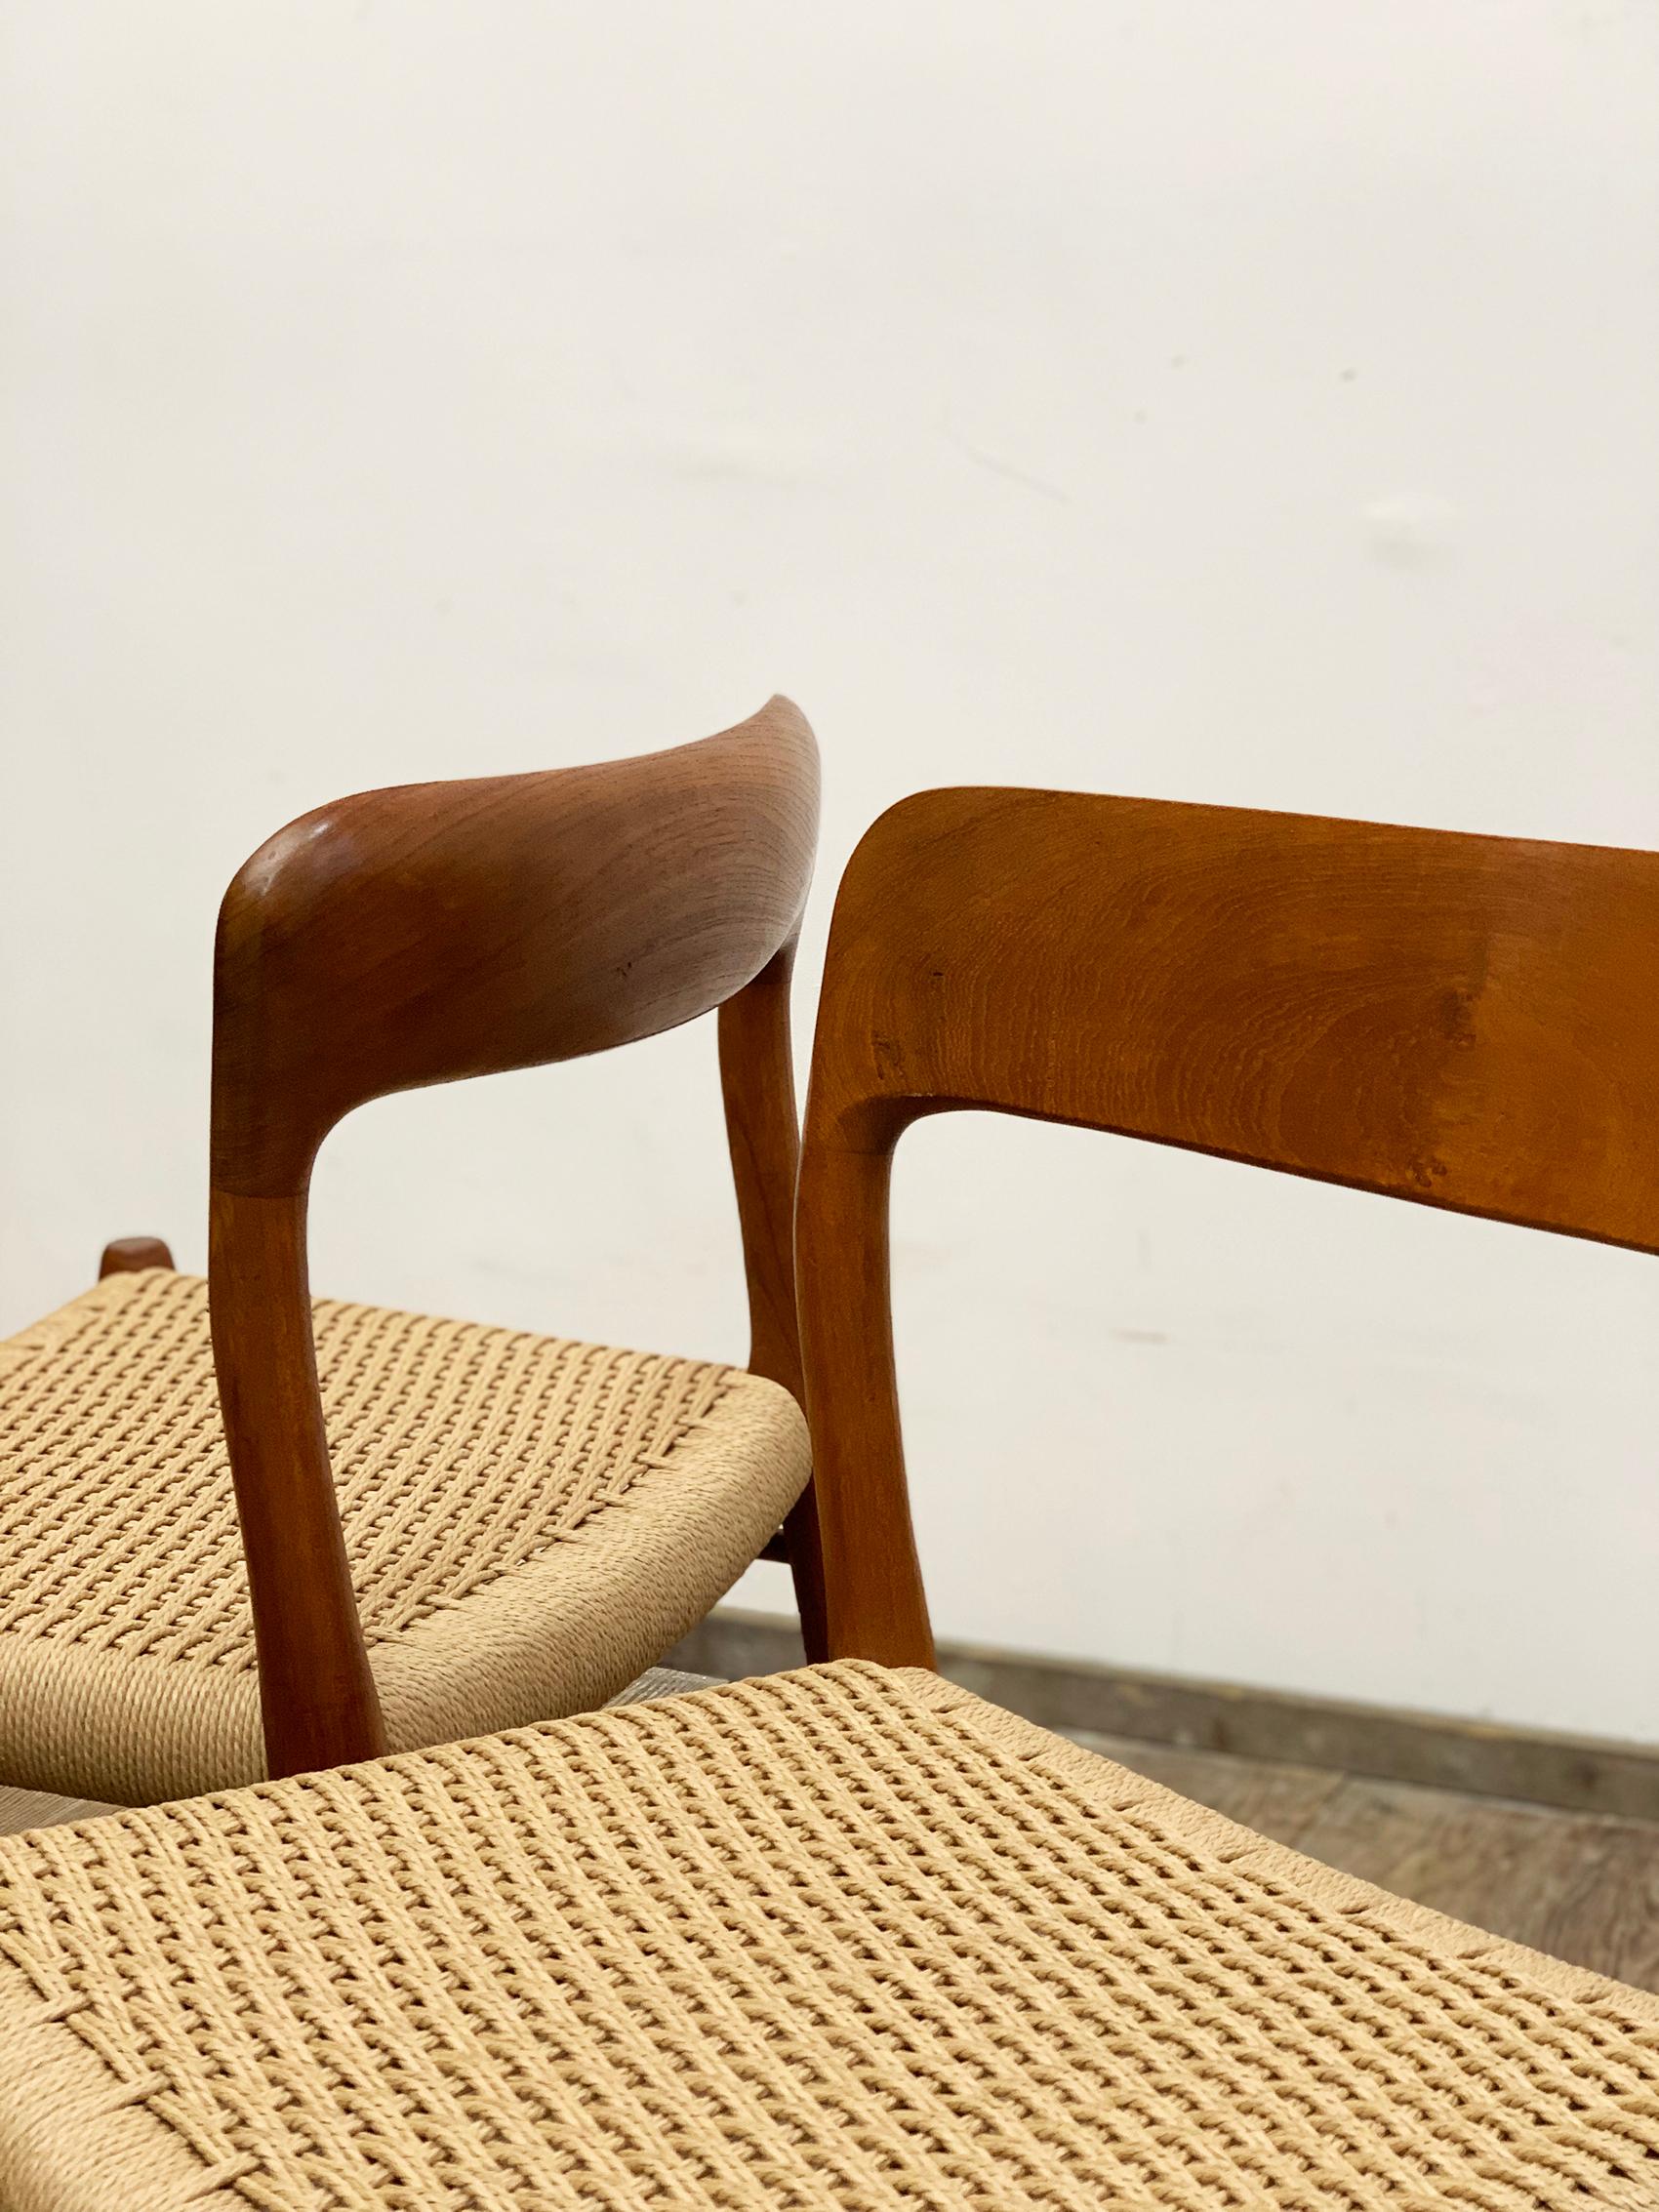 Mid-20th Century Midcentury Teak Dining Chairs #75 by Niels O. Møller for J. L. Moller, Set of 8